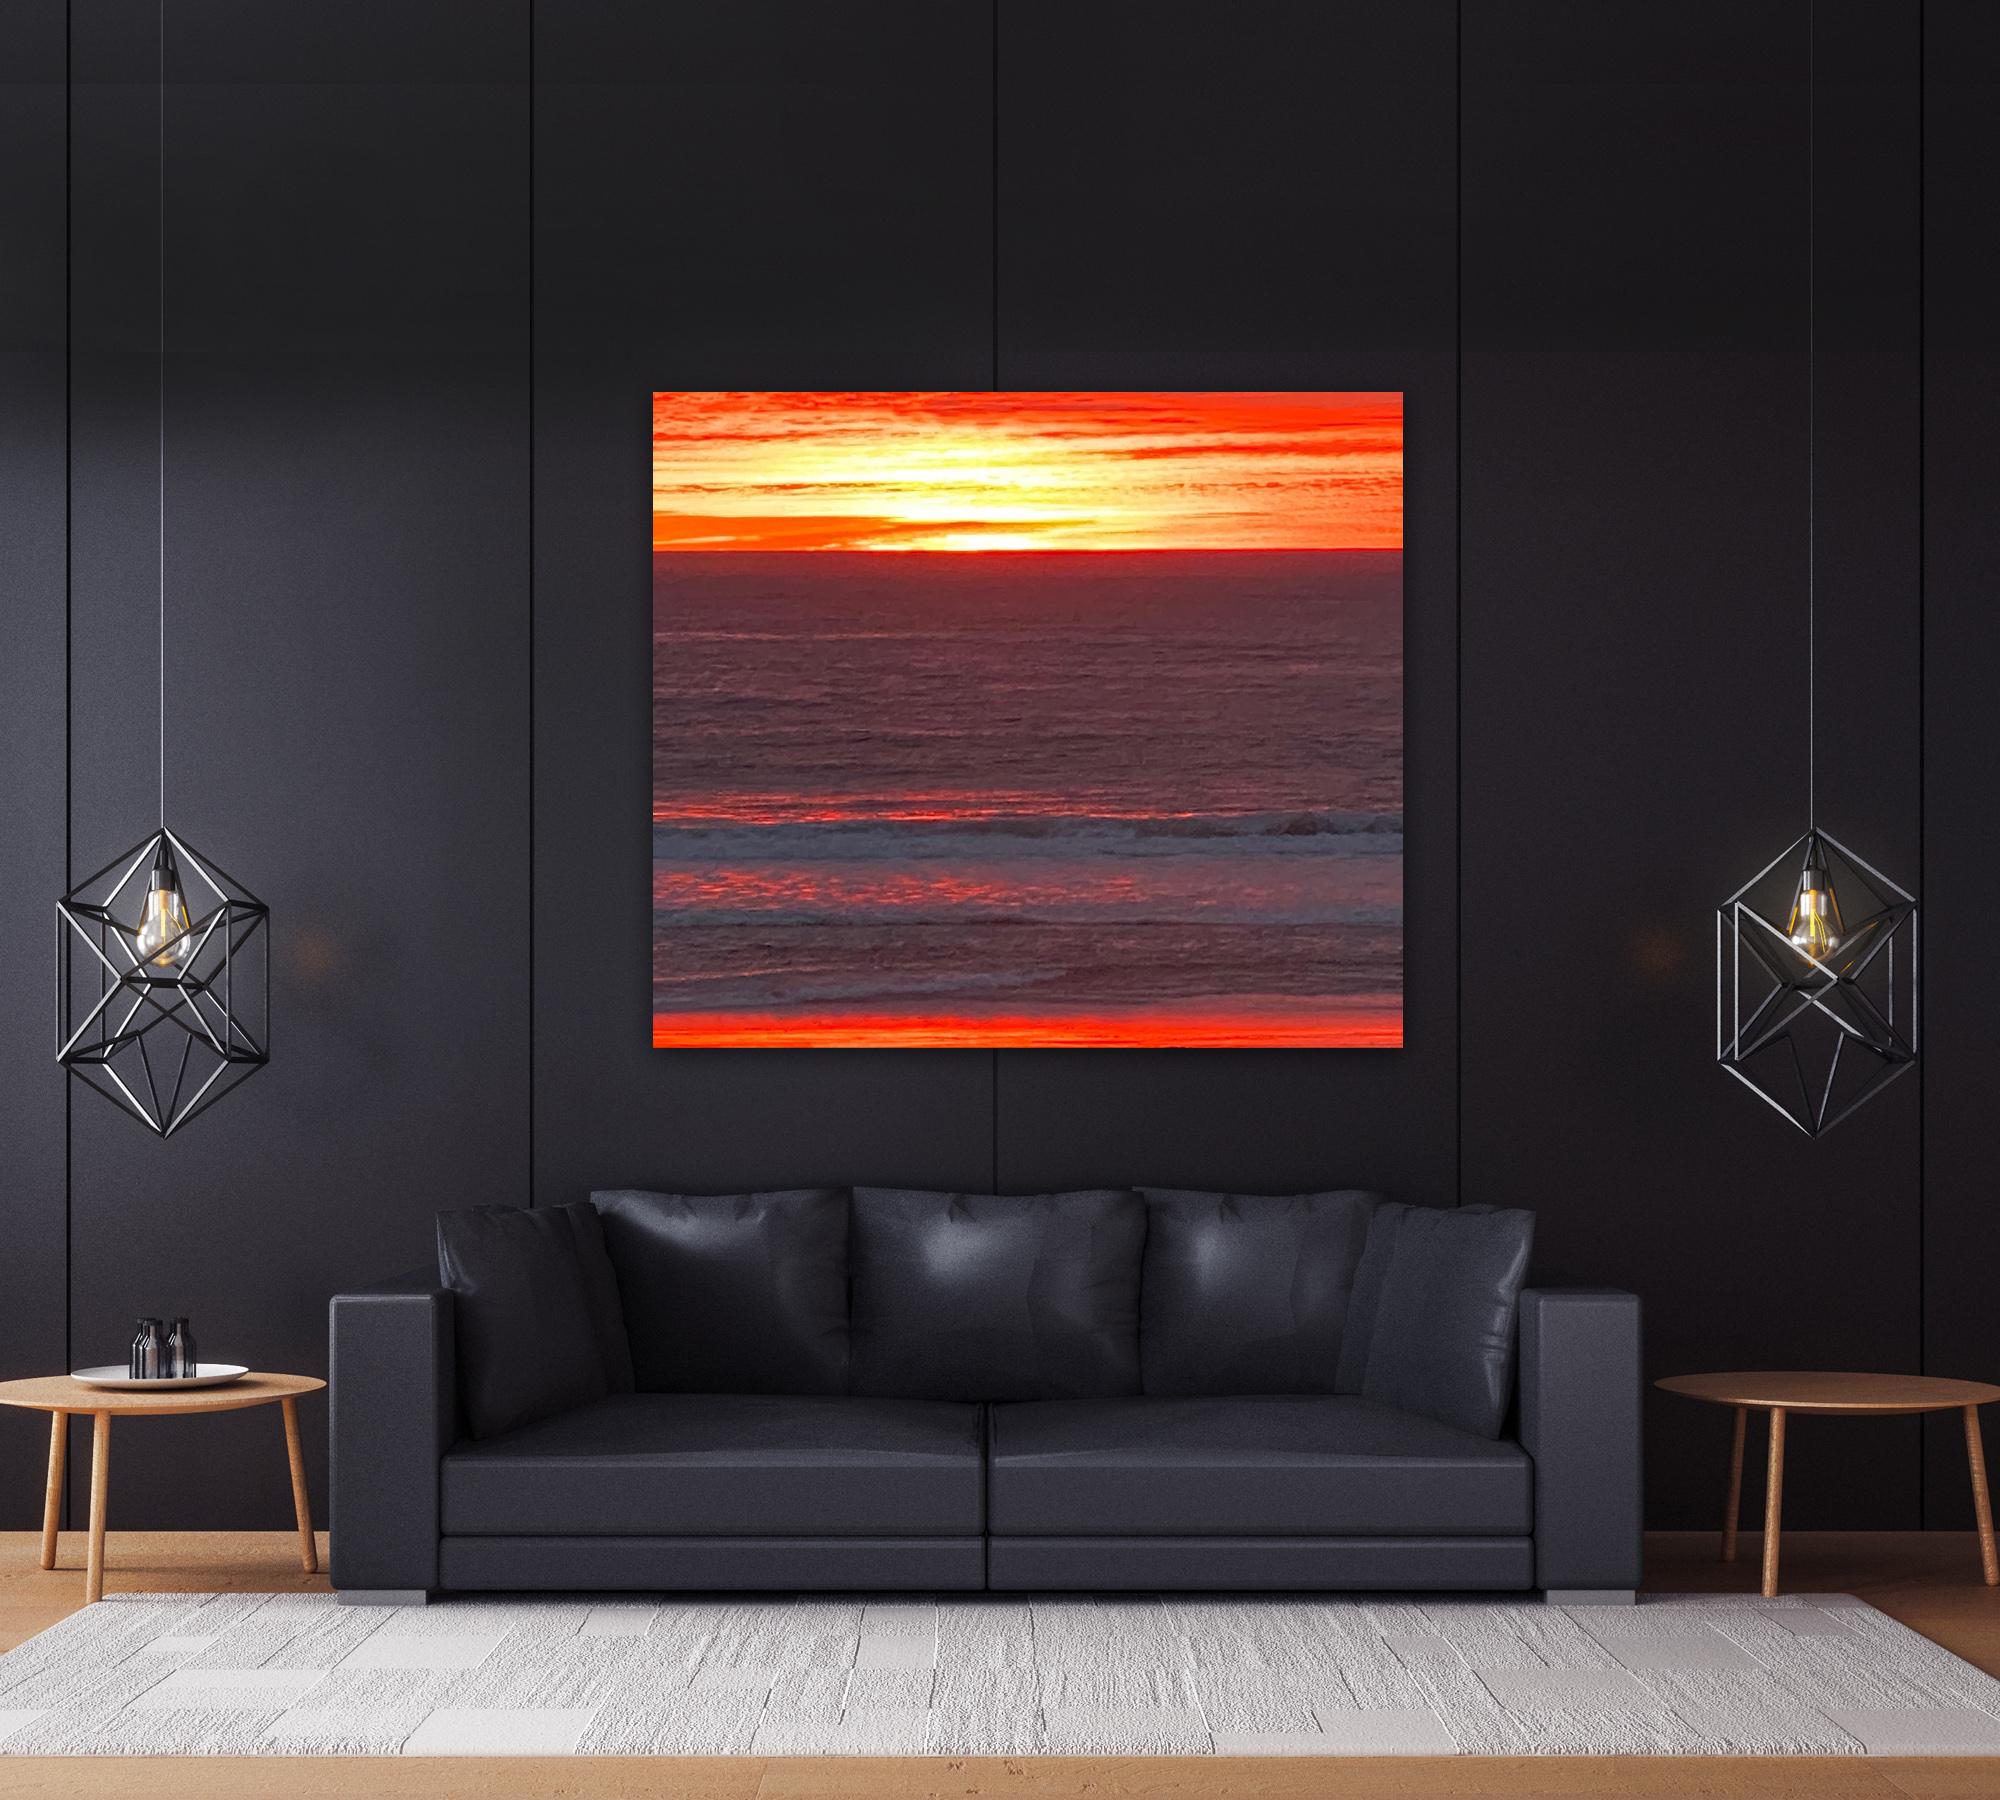 Orange Rays Large Photography on Canvas Seascape Limited Edition 1/10 - Brown Color Photograph by O Devan